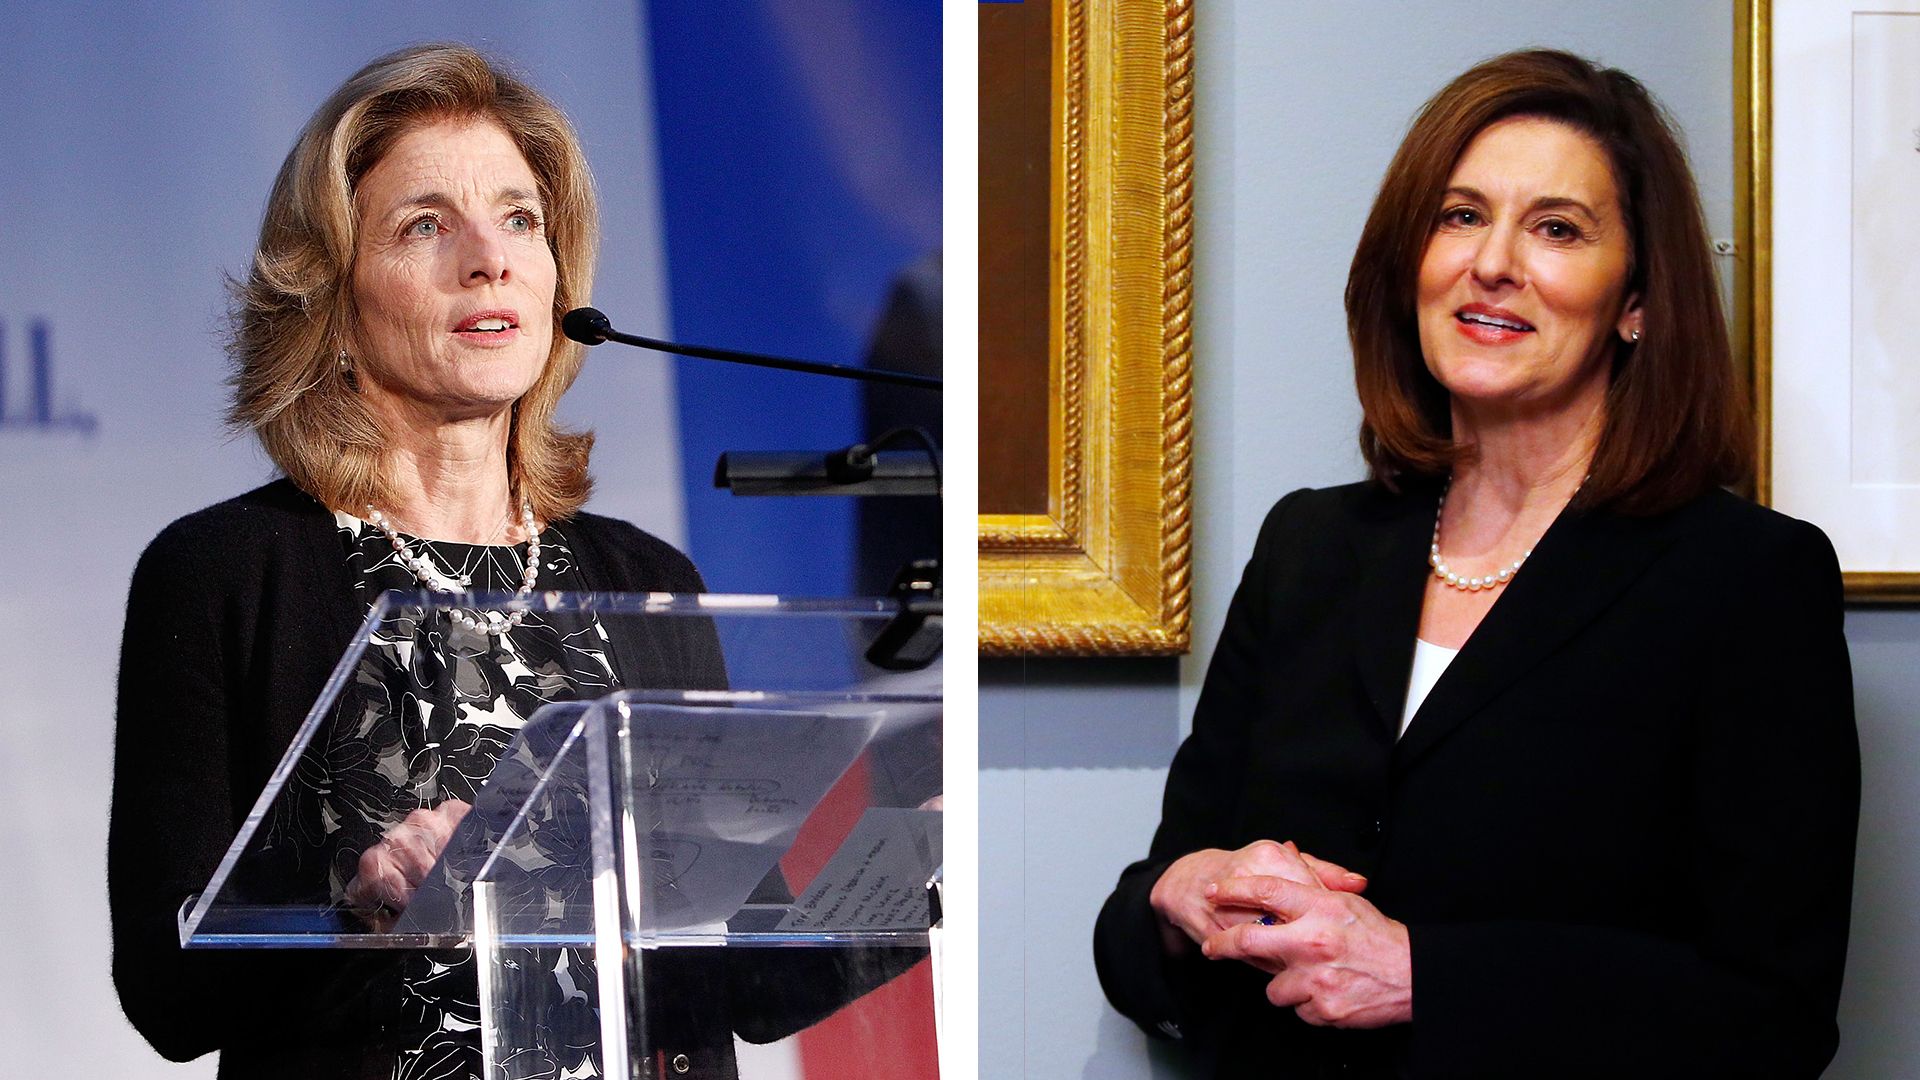 Caroline Kennedy and Vicki Kennedy are pictured in two photos side by side